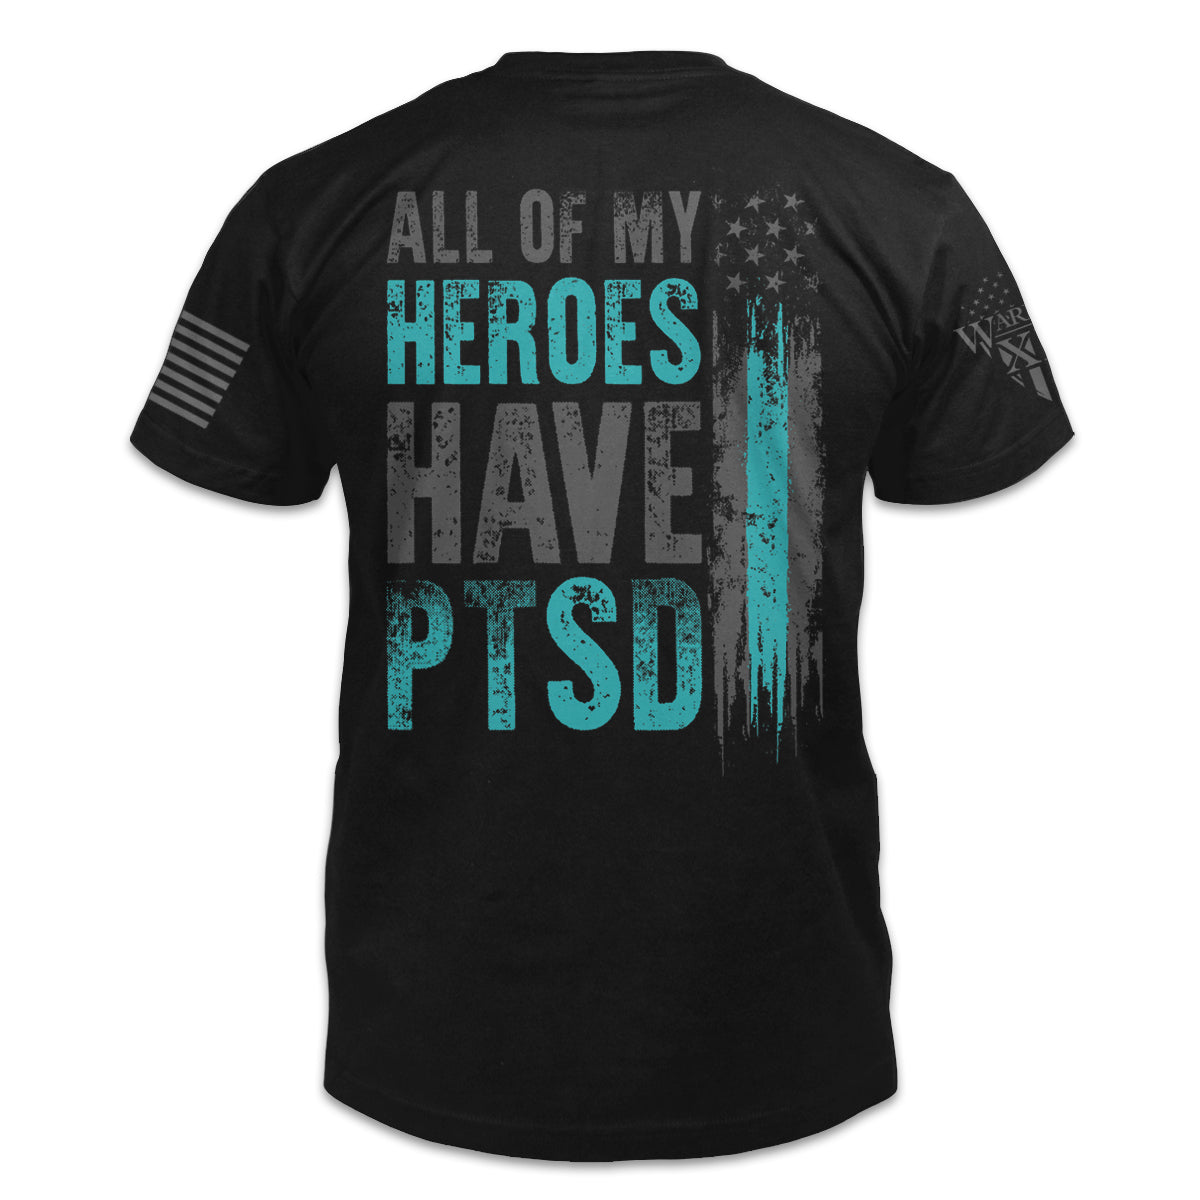 The back of "All Of My Heroes Have PTSD" featuring the main design of the statement "All Of My Heroes Have PTSD" because a worn American Flag.